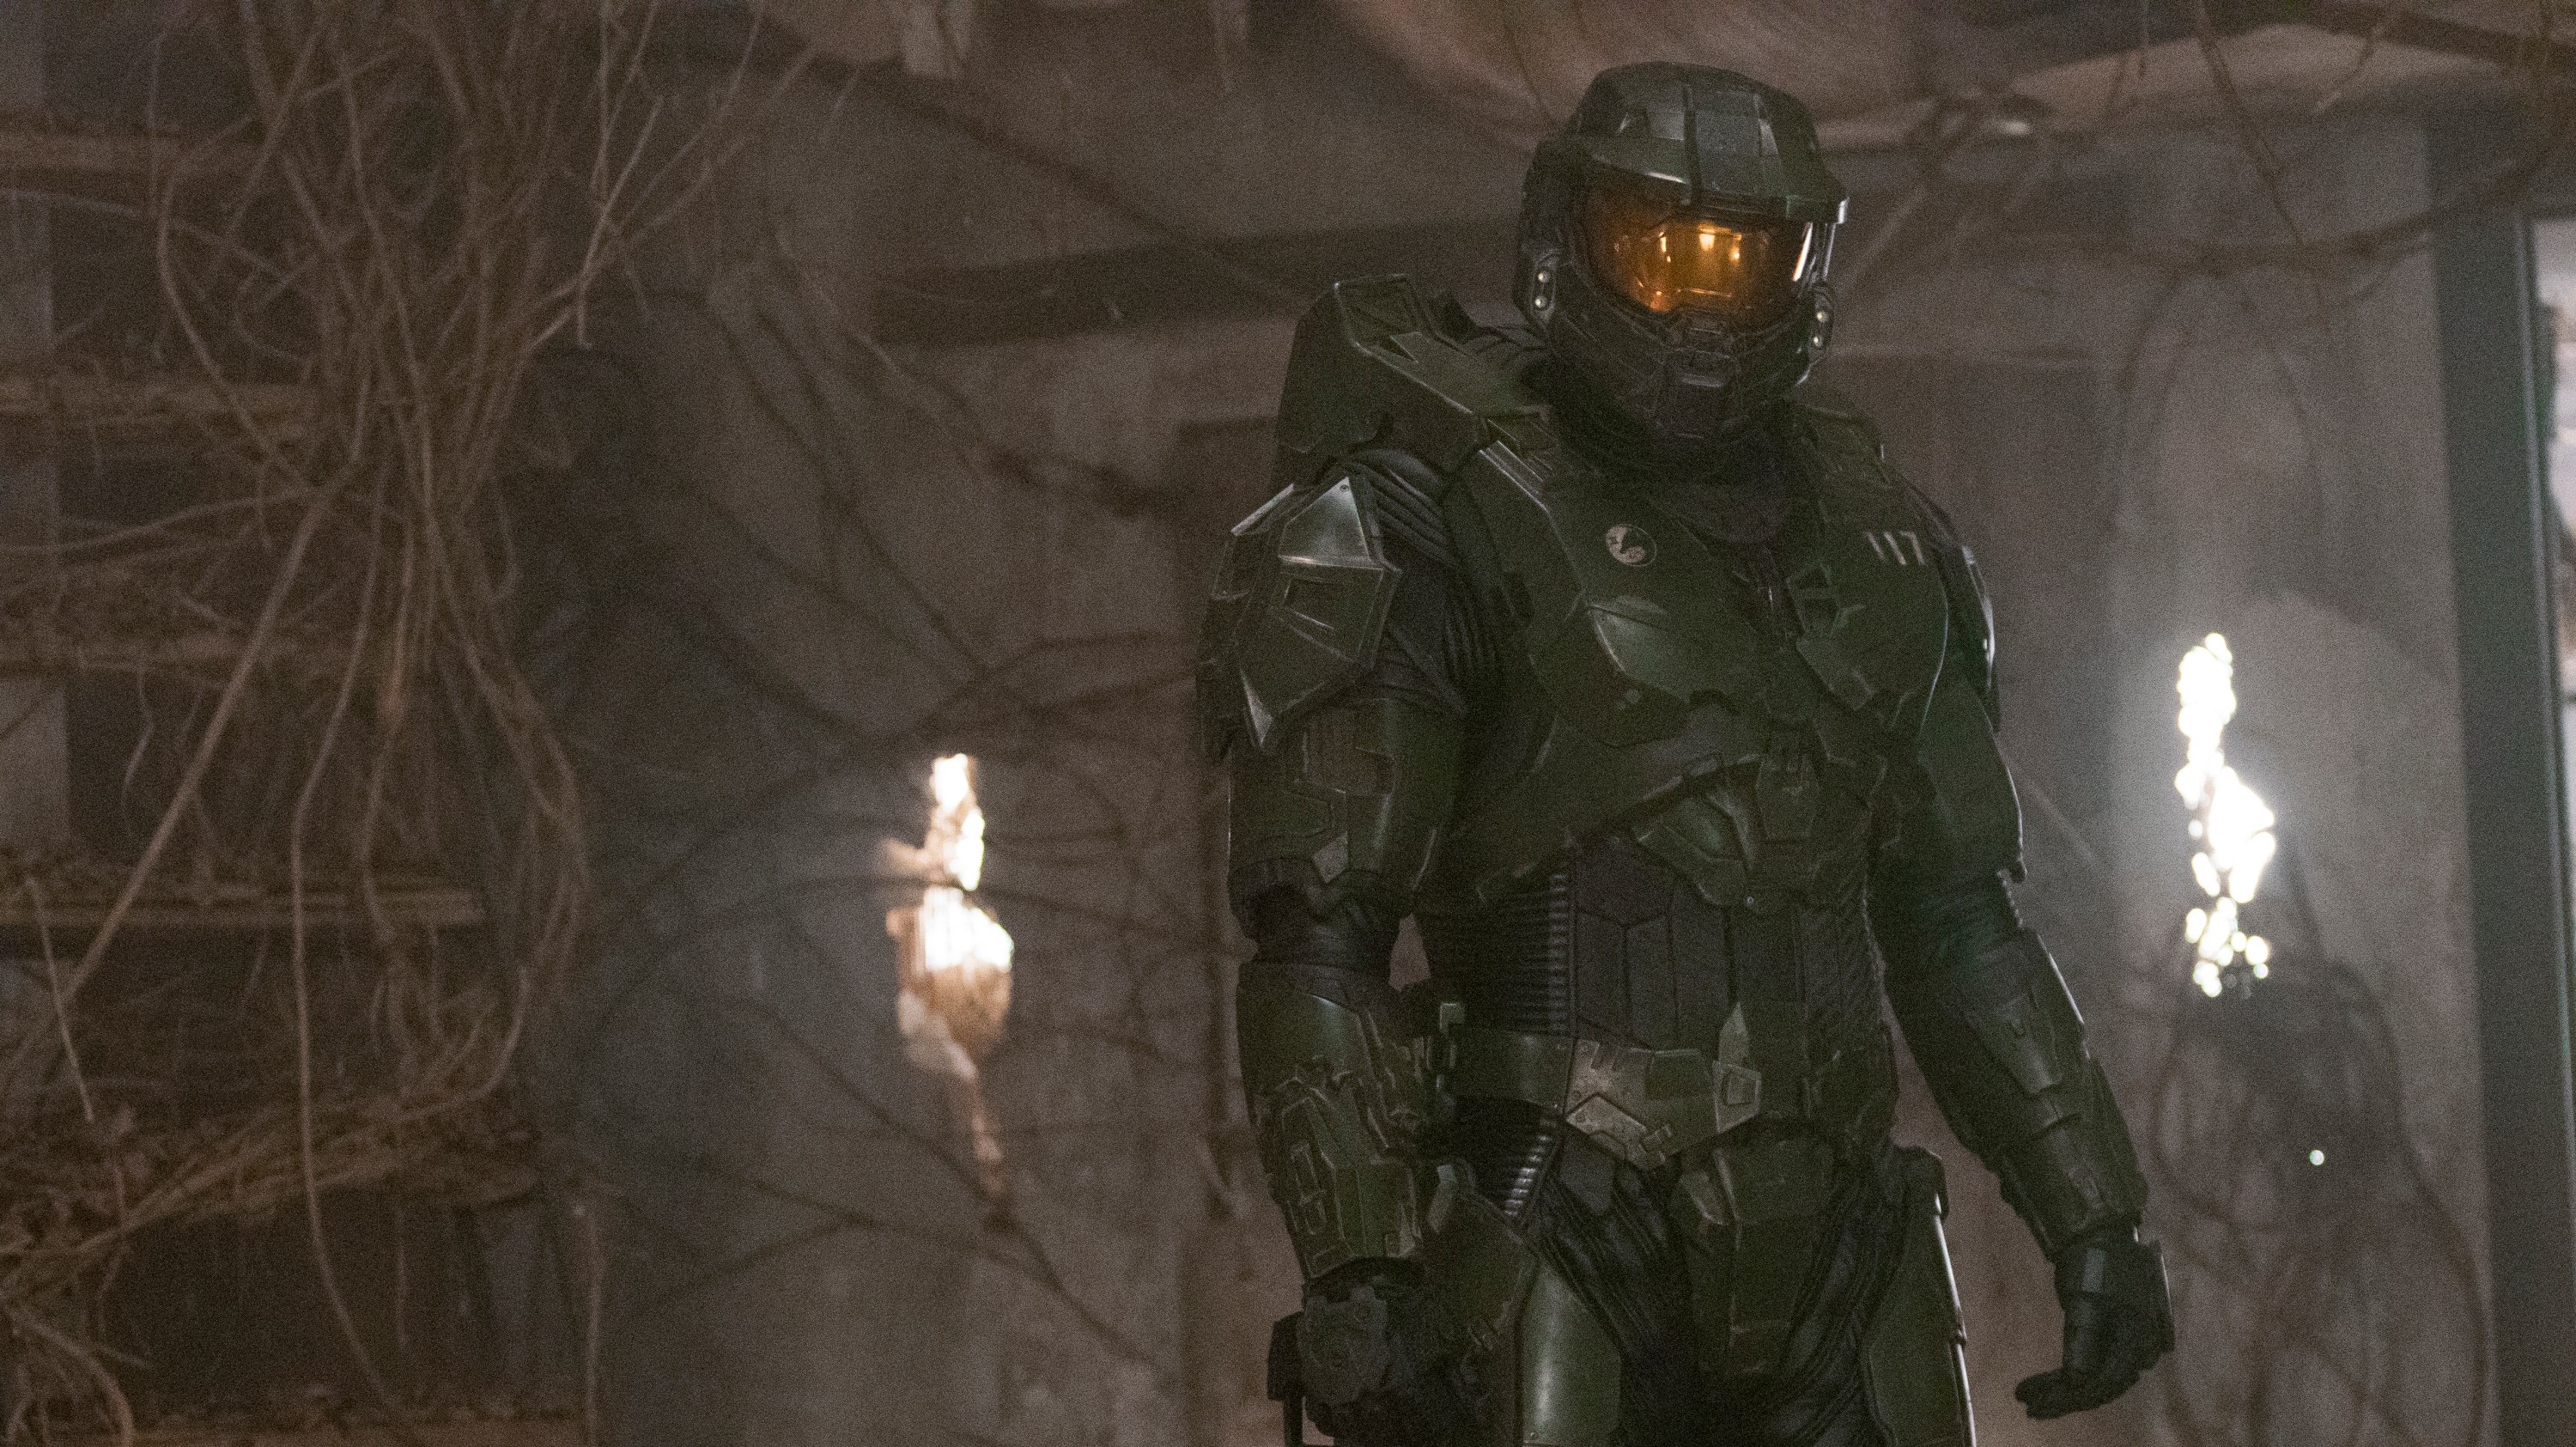 The Halo TV Series Is an Empty Fantasy of a Good War